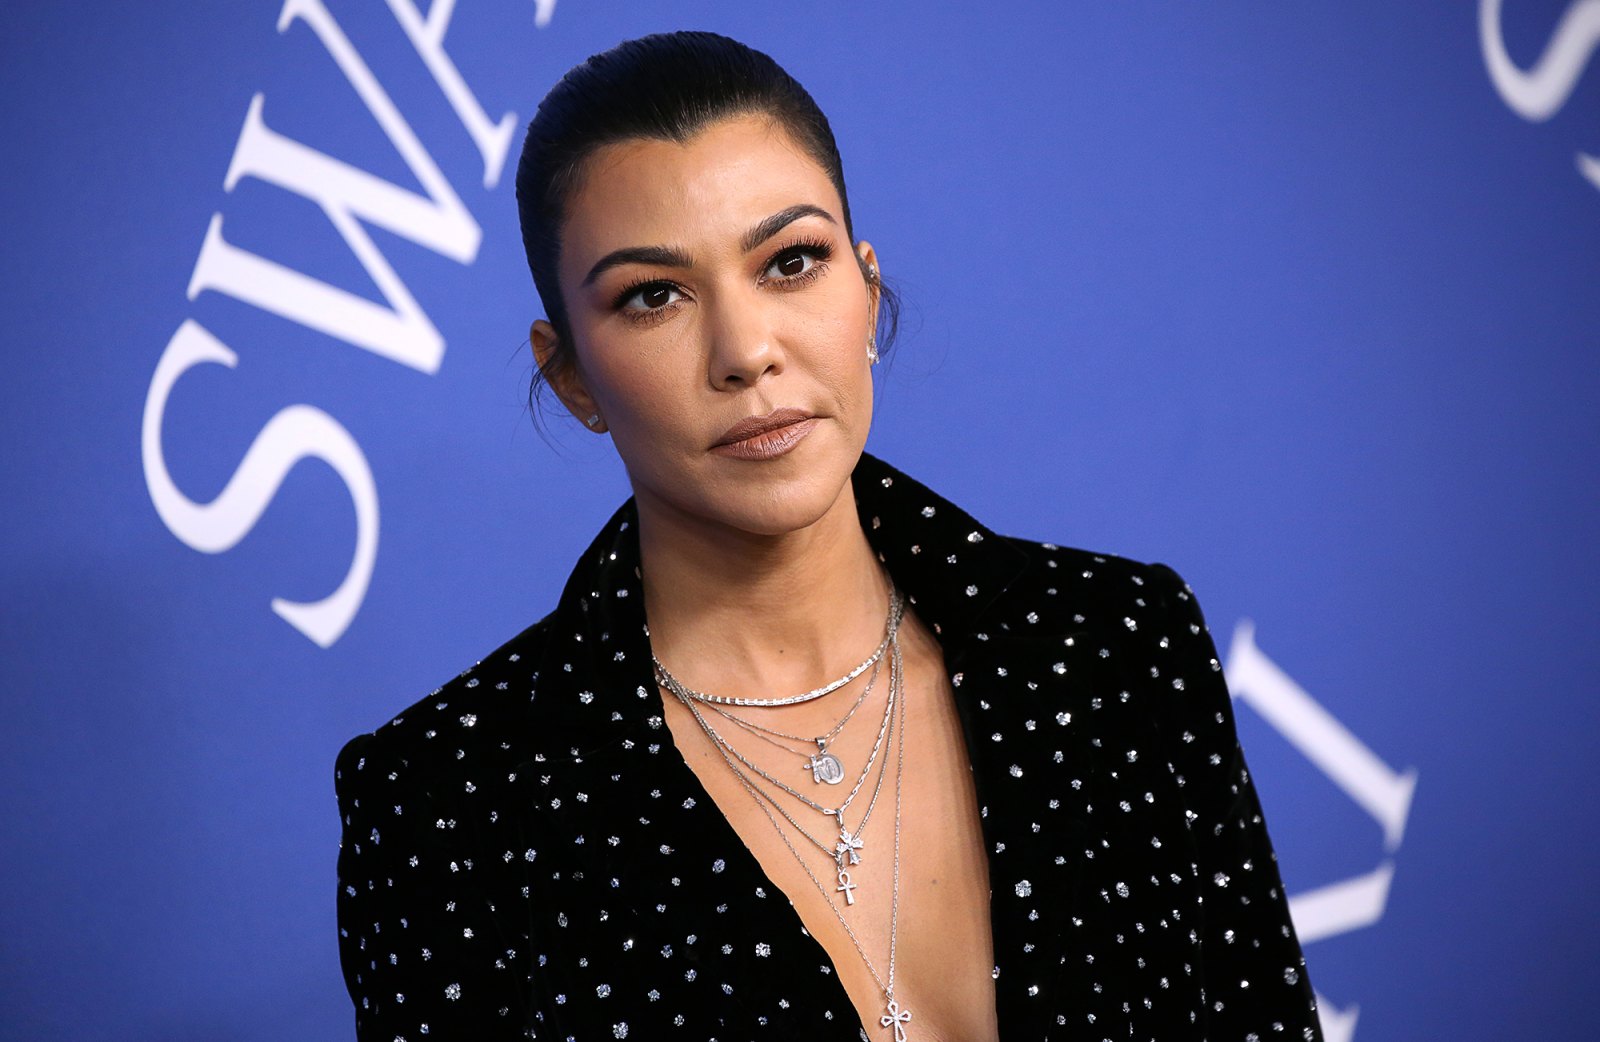 Kourtney Kardashian on the End of 'KUWTK': 'I Was Used to Always Being a Bitch and Having No Feelings'